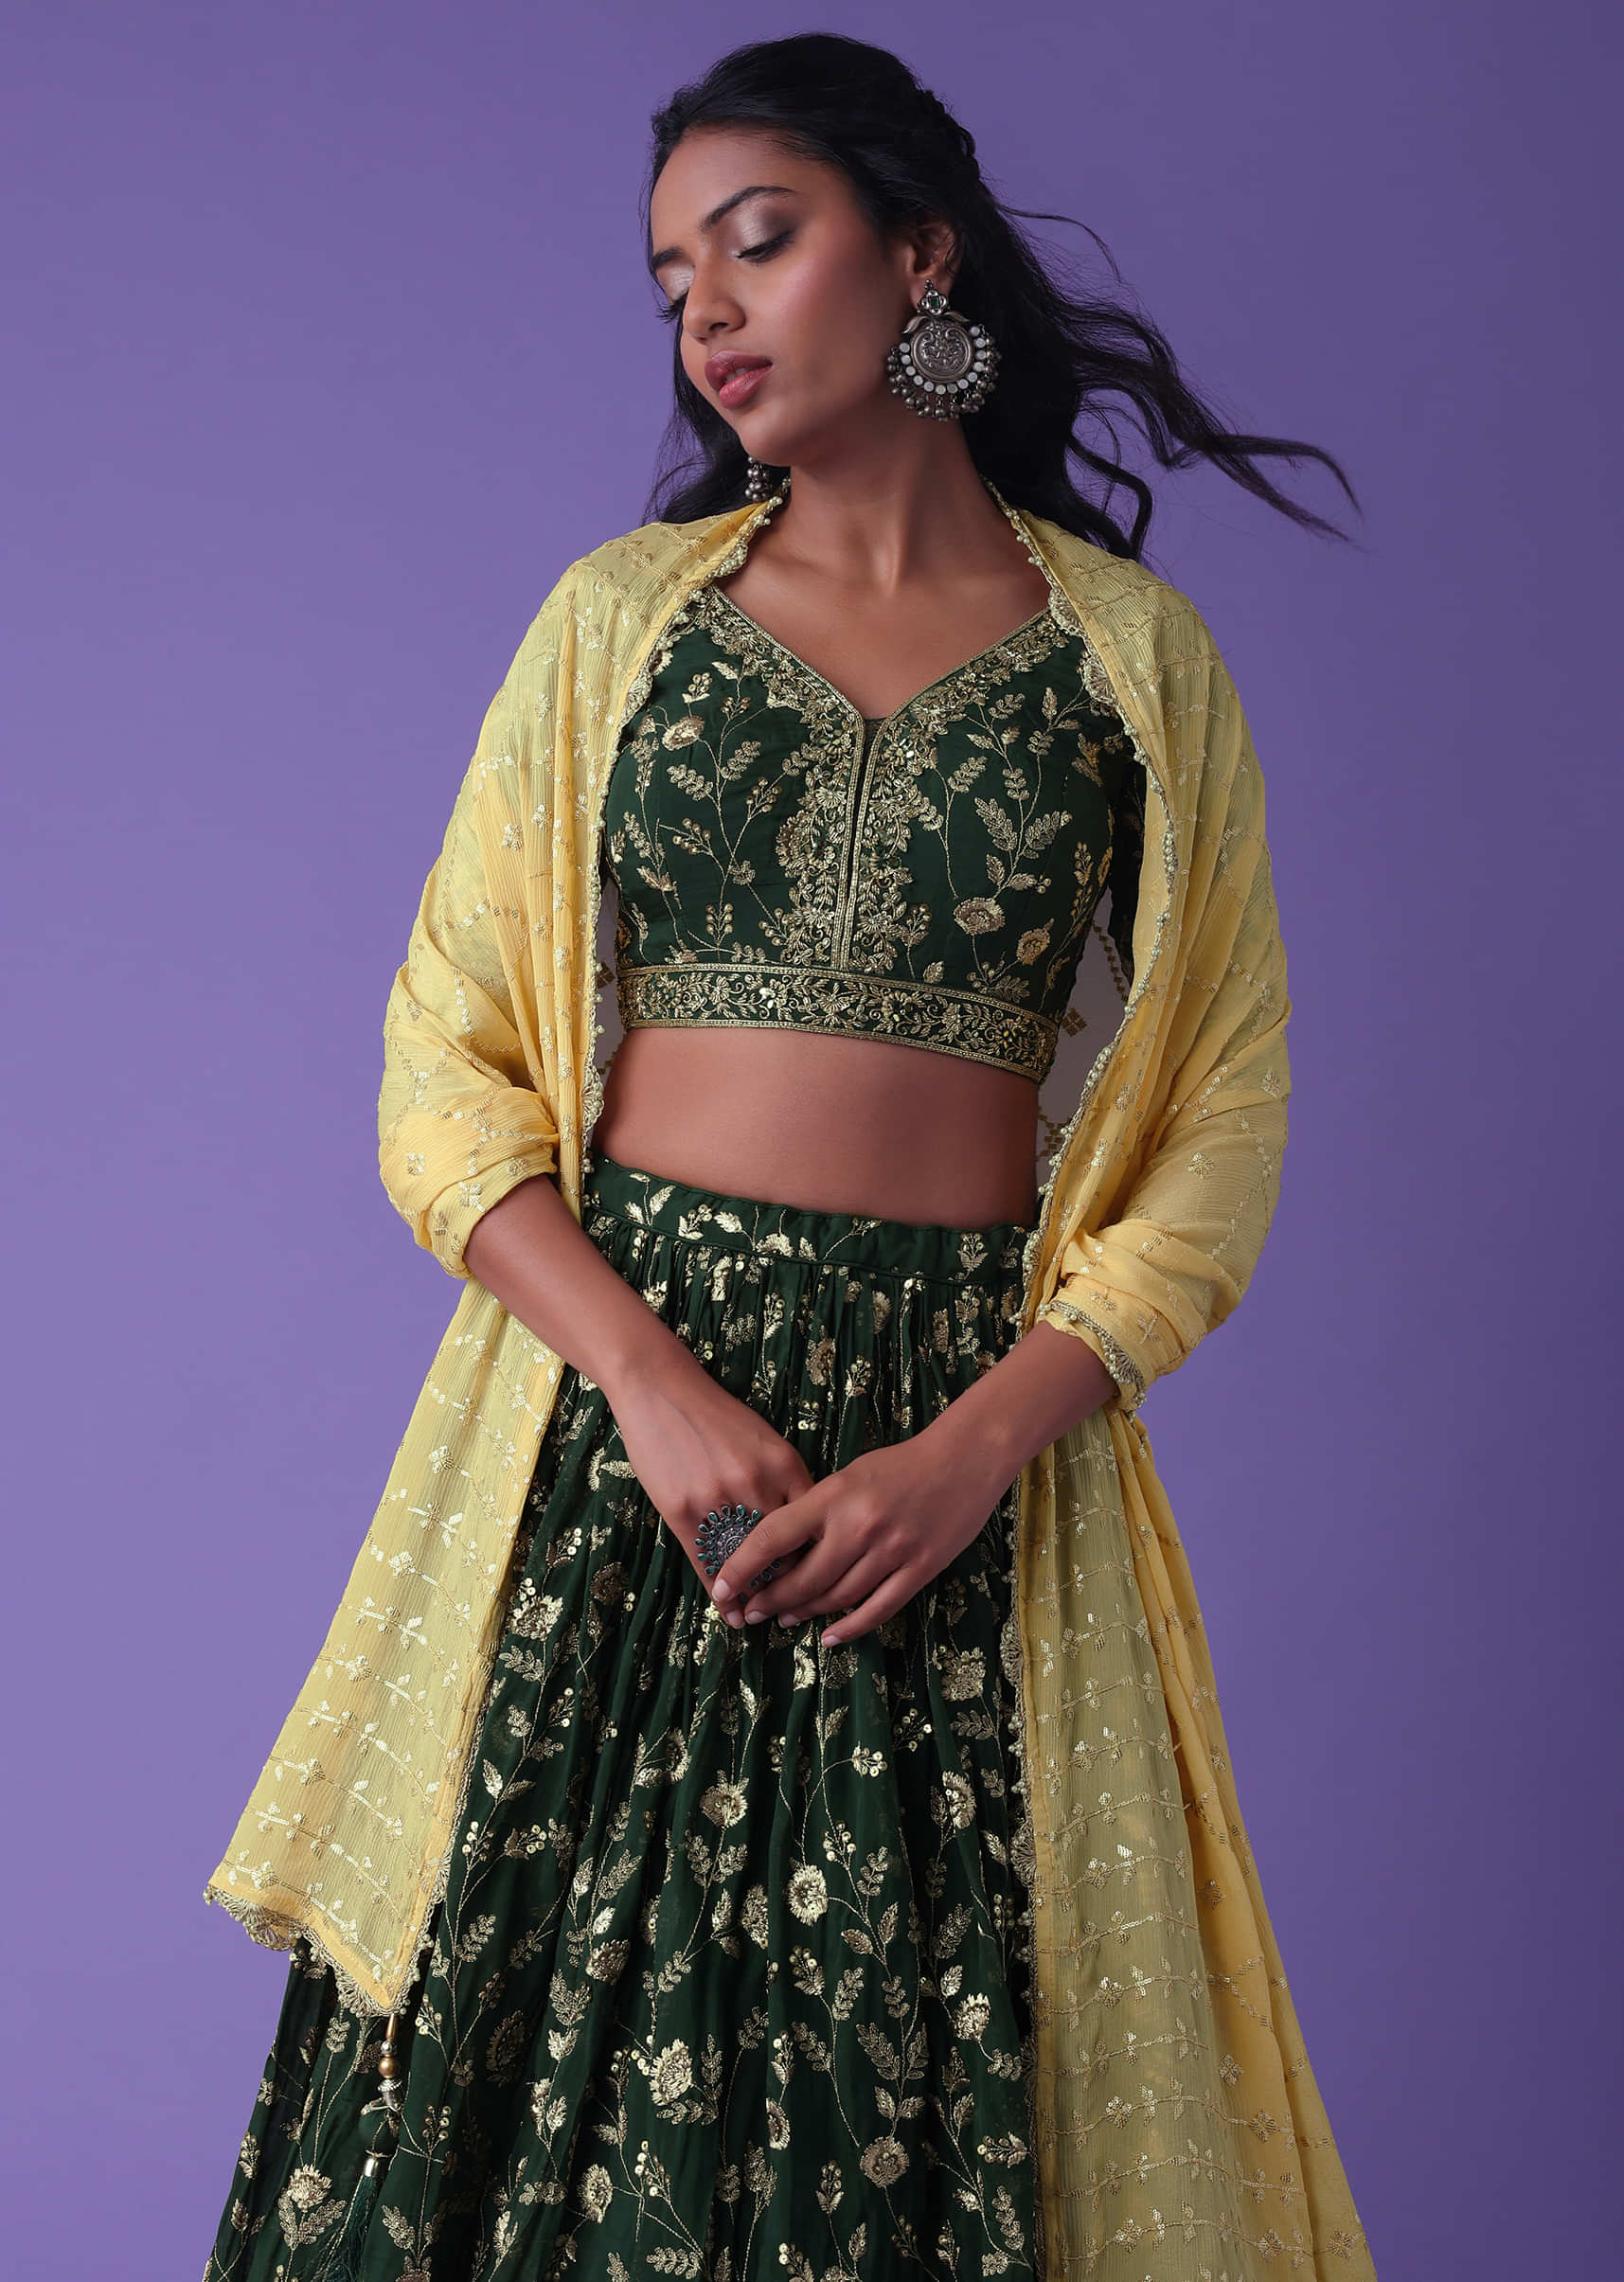 June Bug Green Georgette Lehenga With Zari And Sequins Embroidery